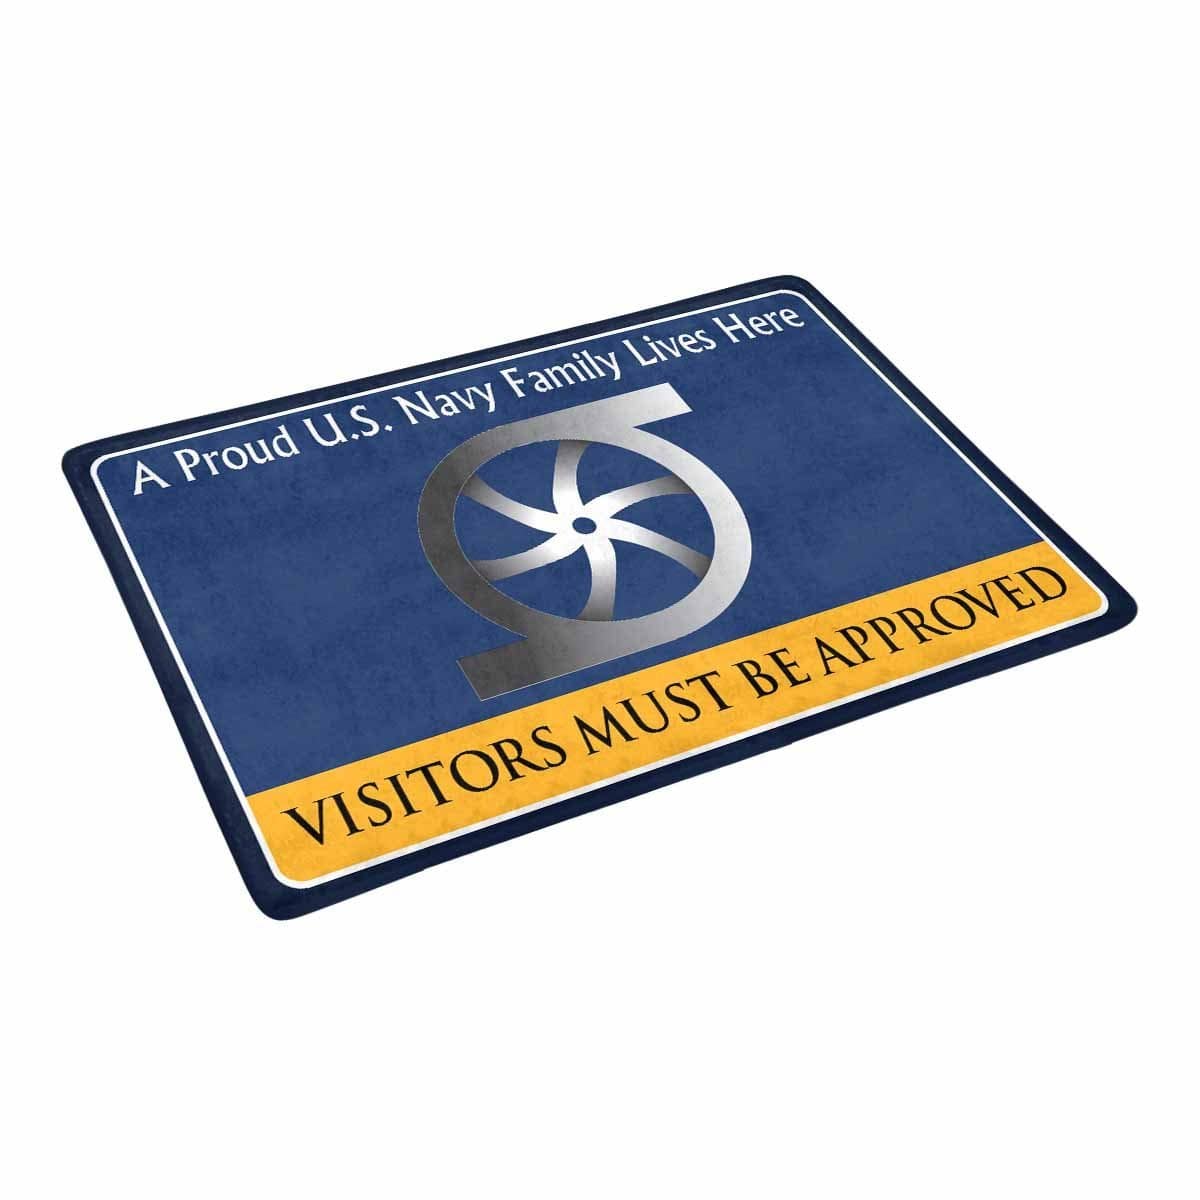 Navy Gas Turbine Systems Technician Navy GS Family Doormat - Visitors must be approved (23,6 inches x 15,7 inches)-Doormat-Navy-Rate-Veterans Nation